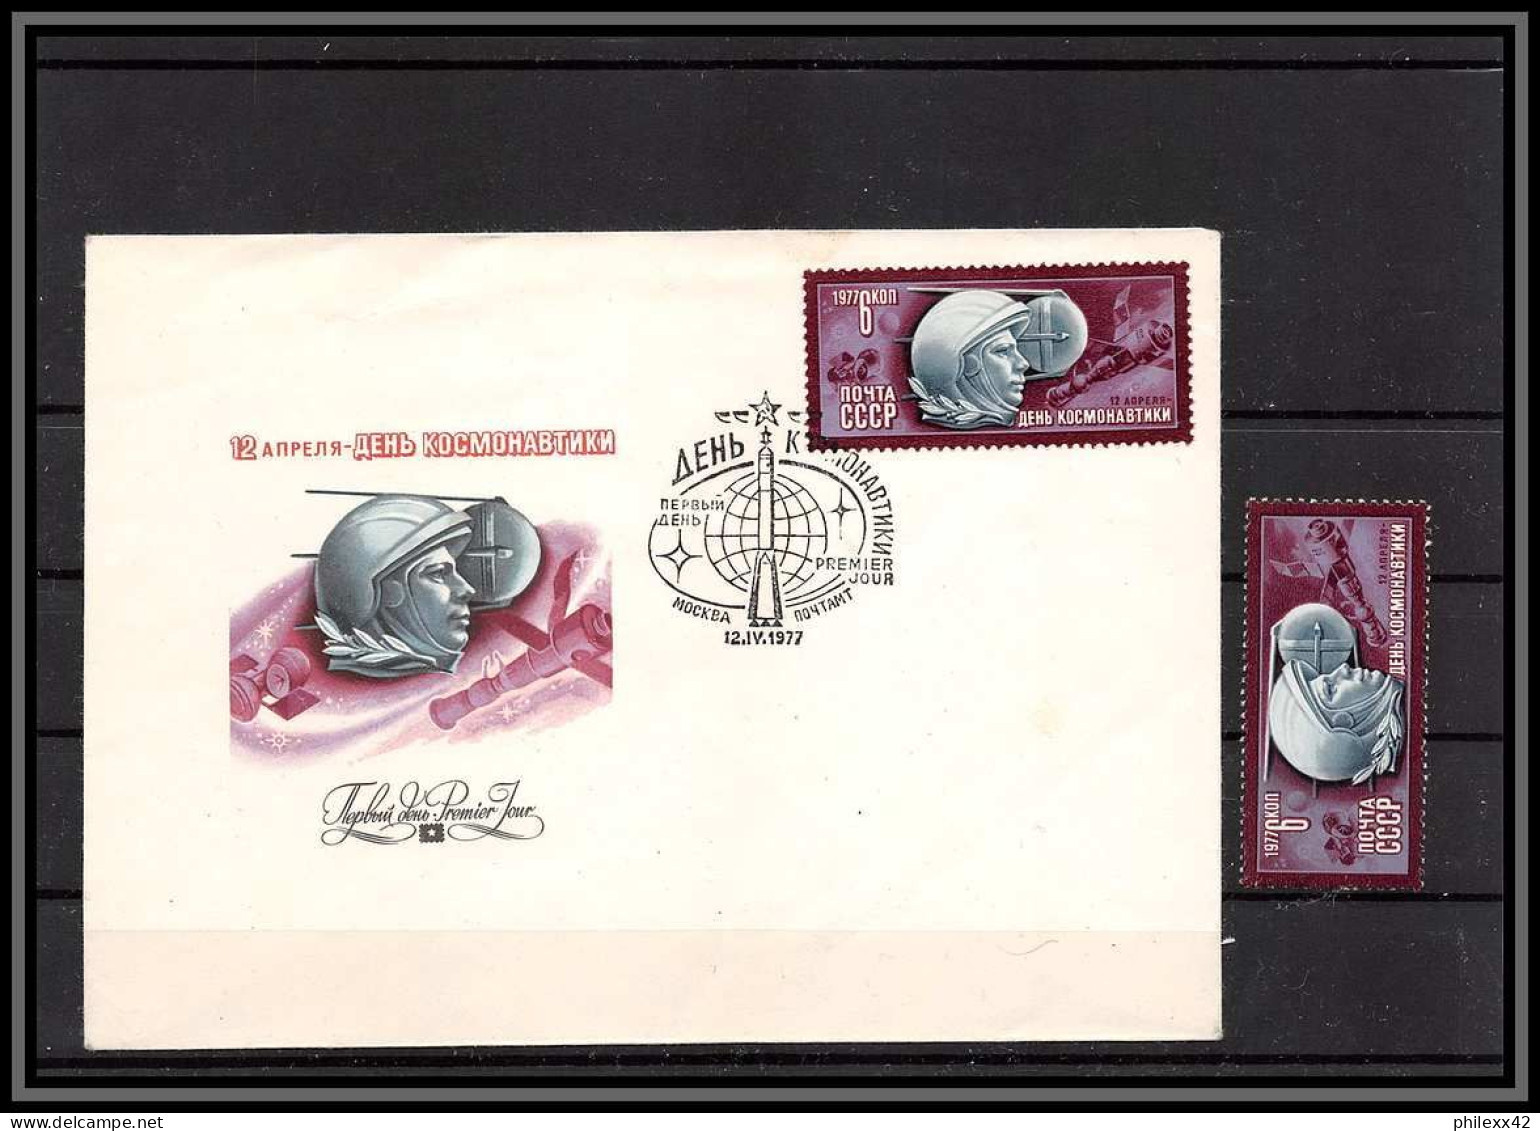 3391 Espace (space) Lettre (cover) Russie (Russia Urss USSR) 4363 Fdc + Mnh ** Cosmonauts Day Gagarine Gagarin 12/4/1977 - UdSSR